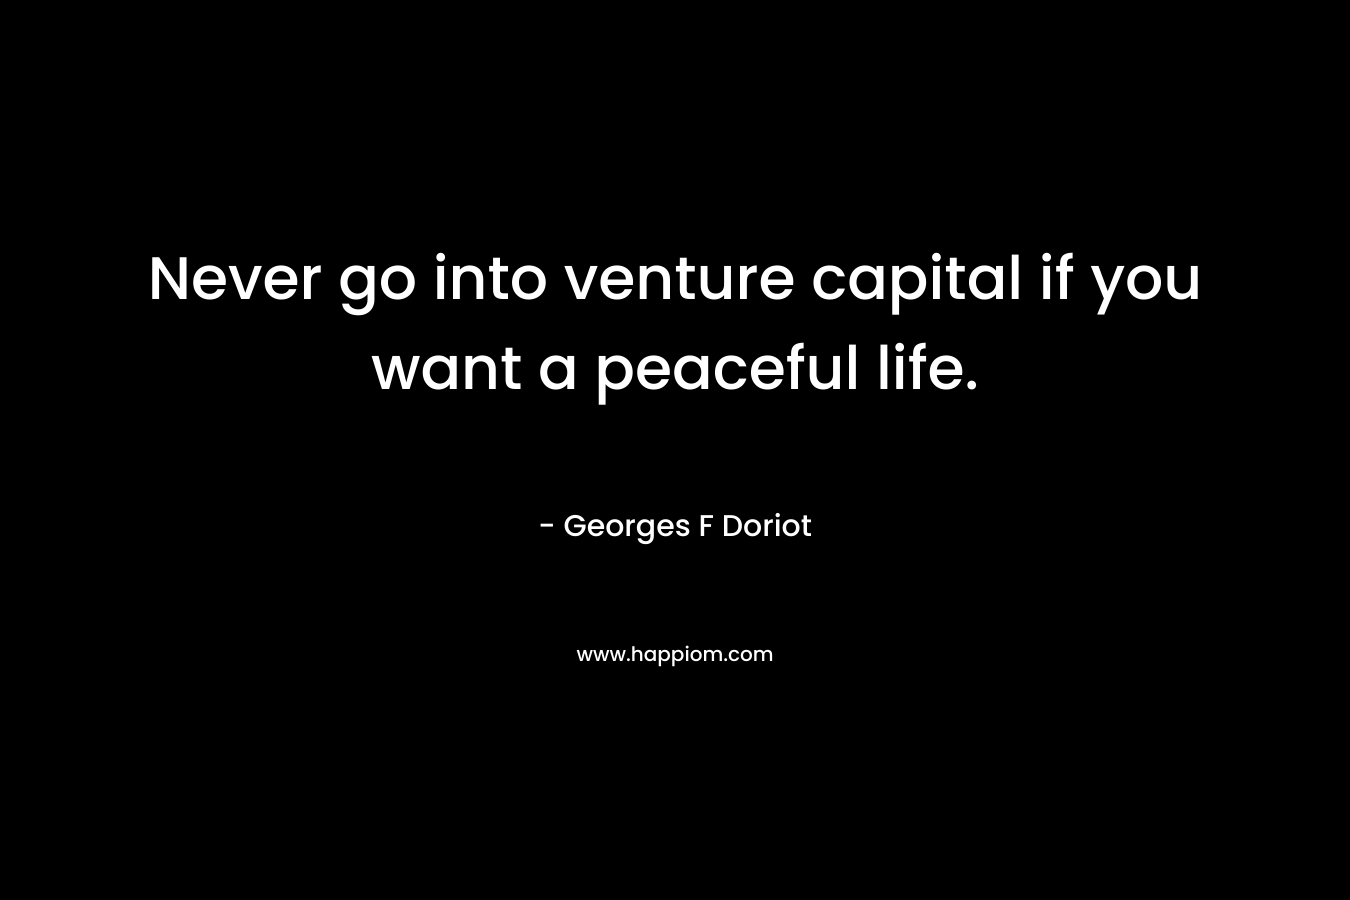 Never go into venture capital if you want a peaceful life. – Georges F Doriot